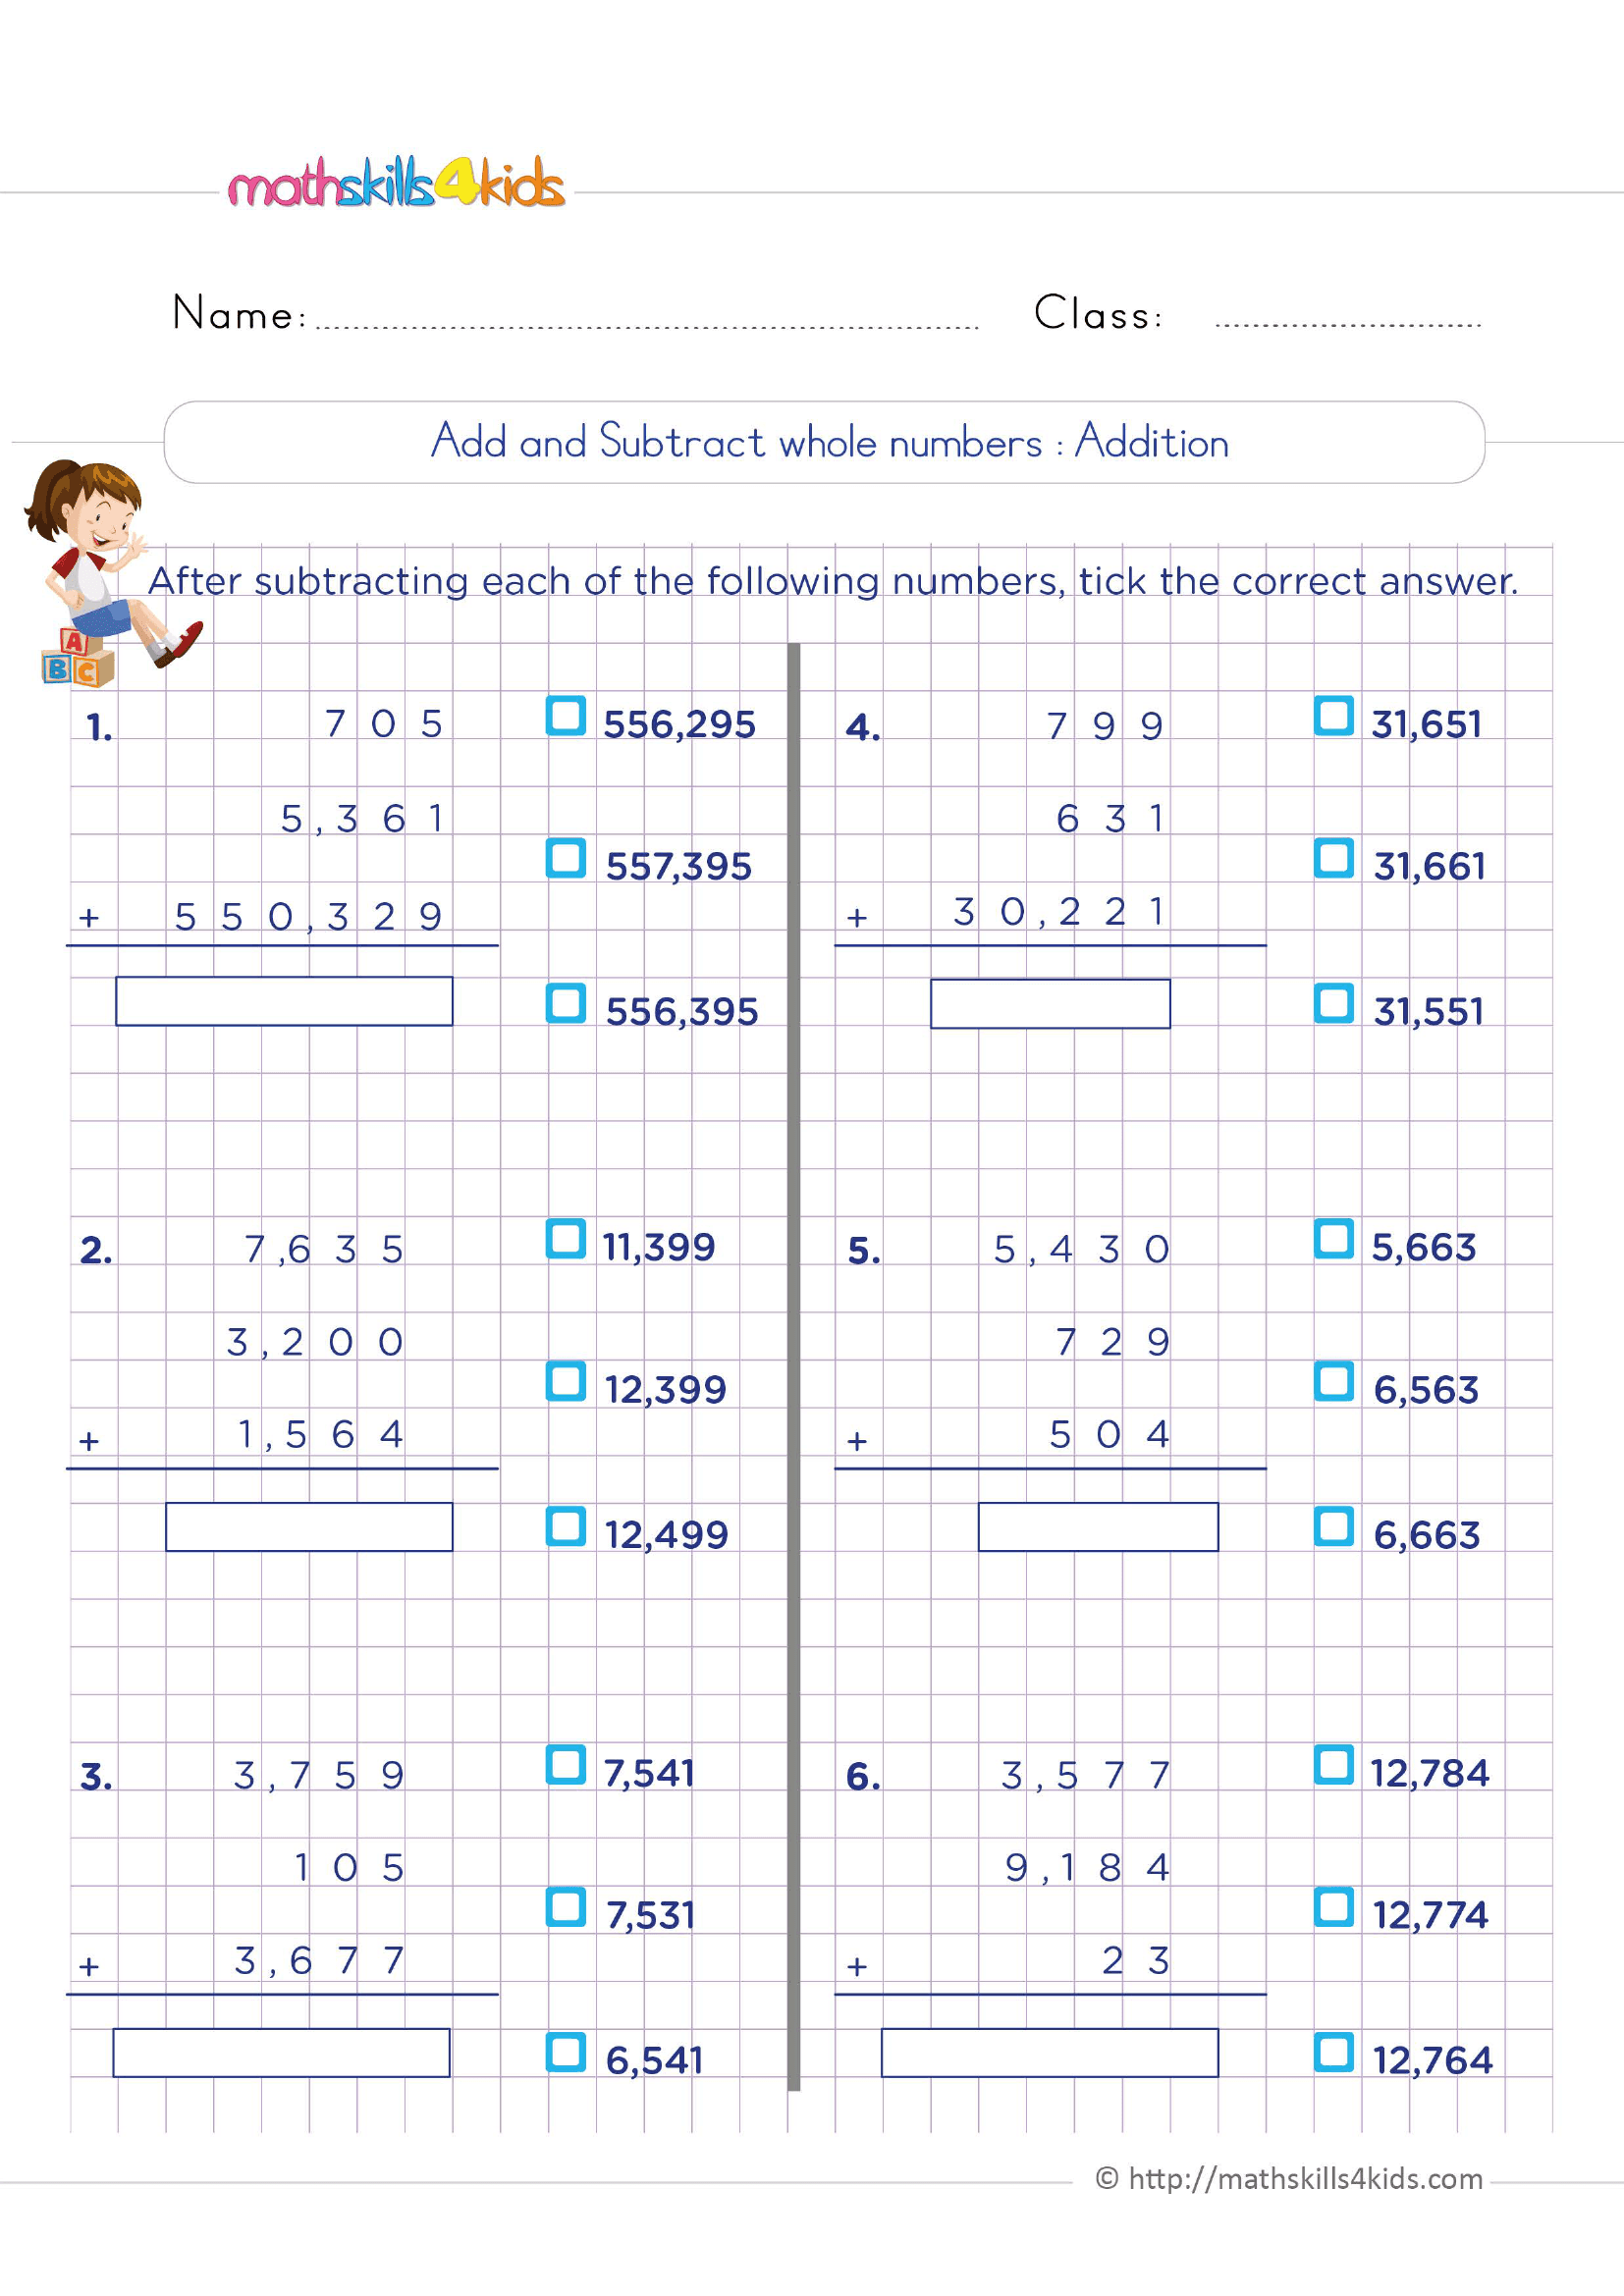 add-and-subtract-whole-numbers-worksheet-zone